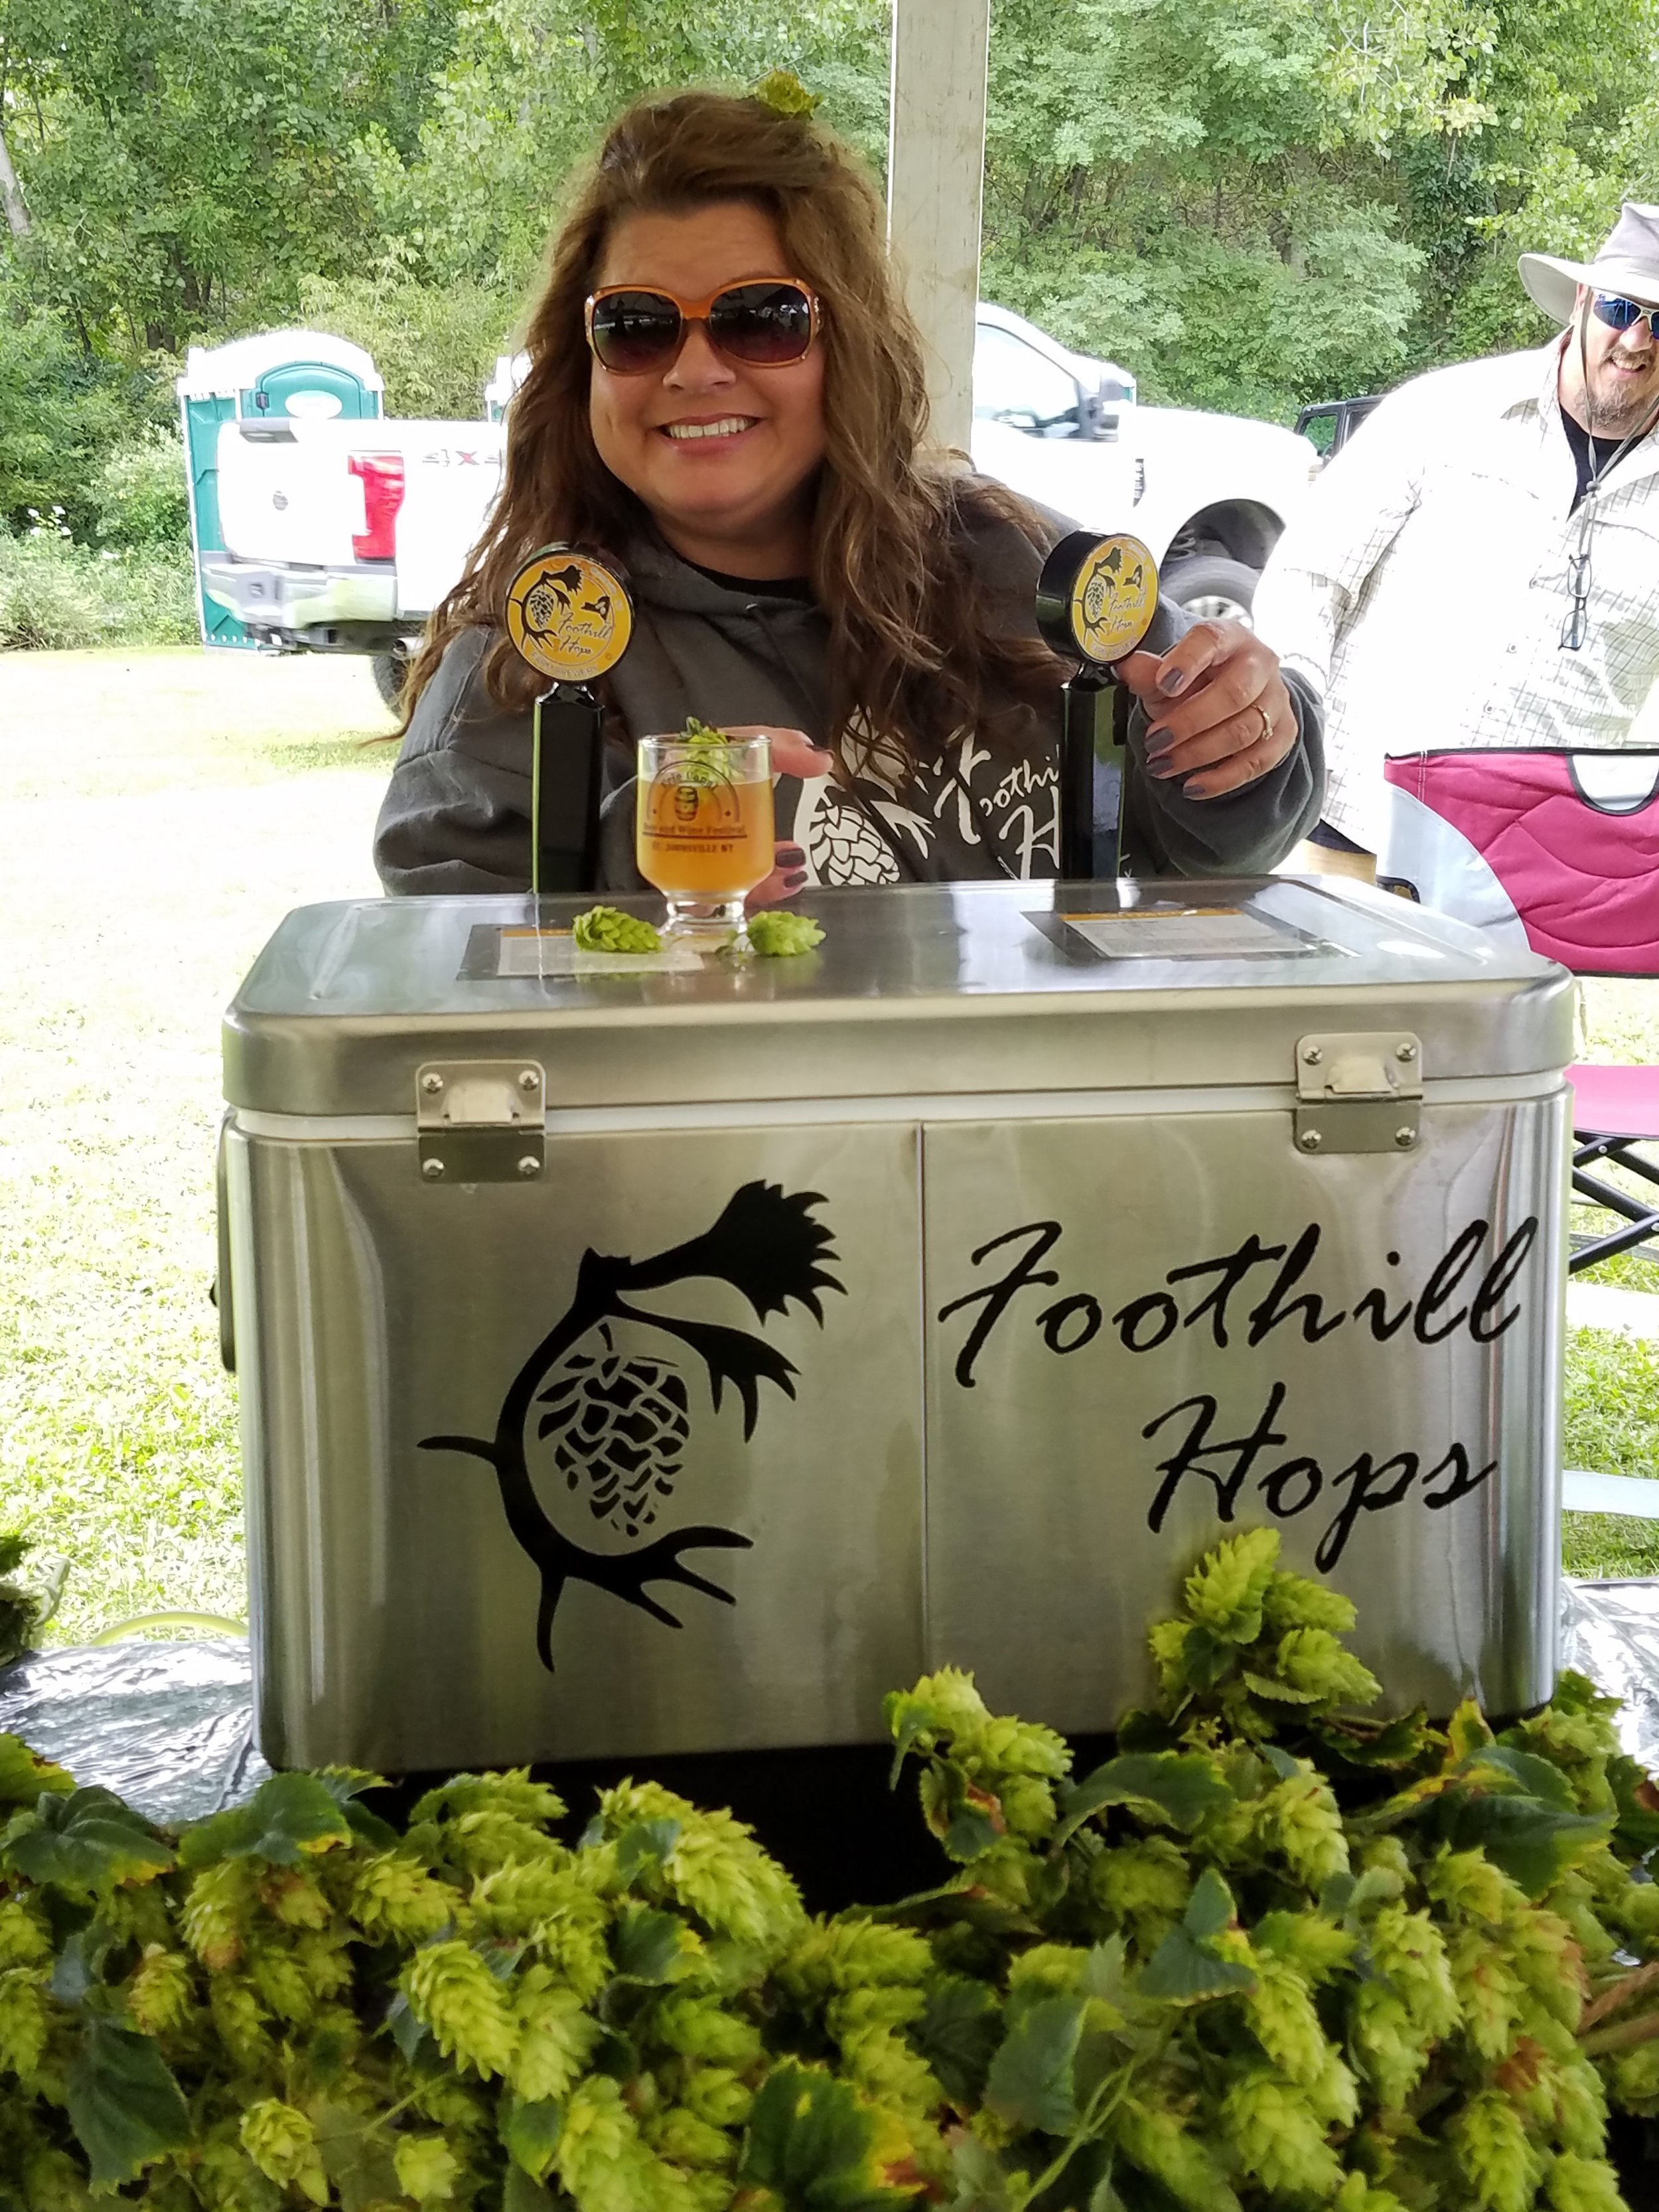 Woman serving beer at festival